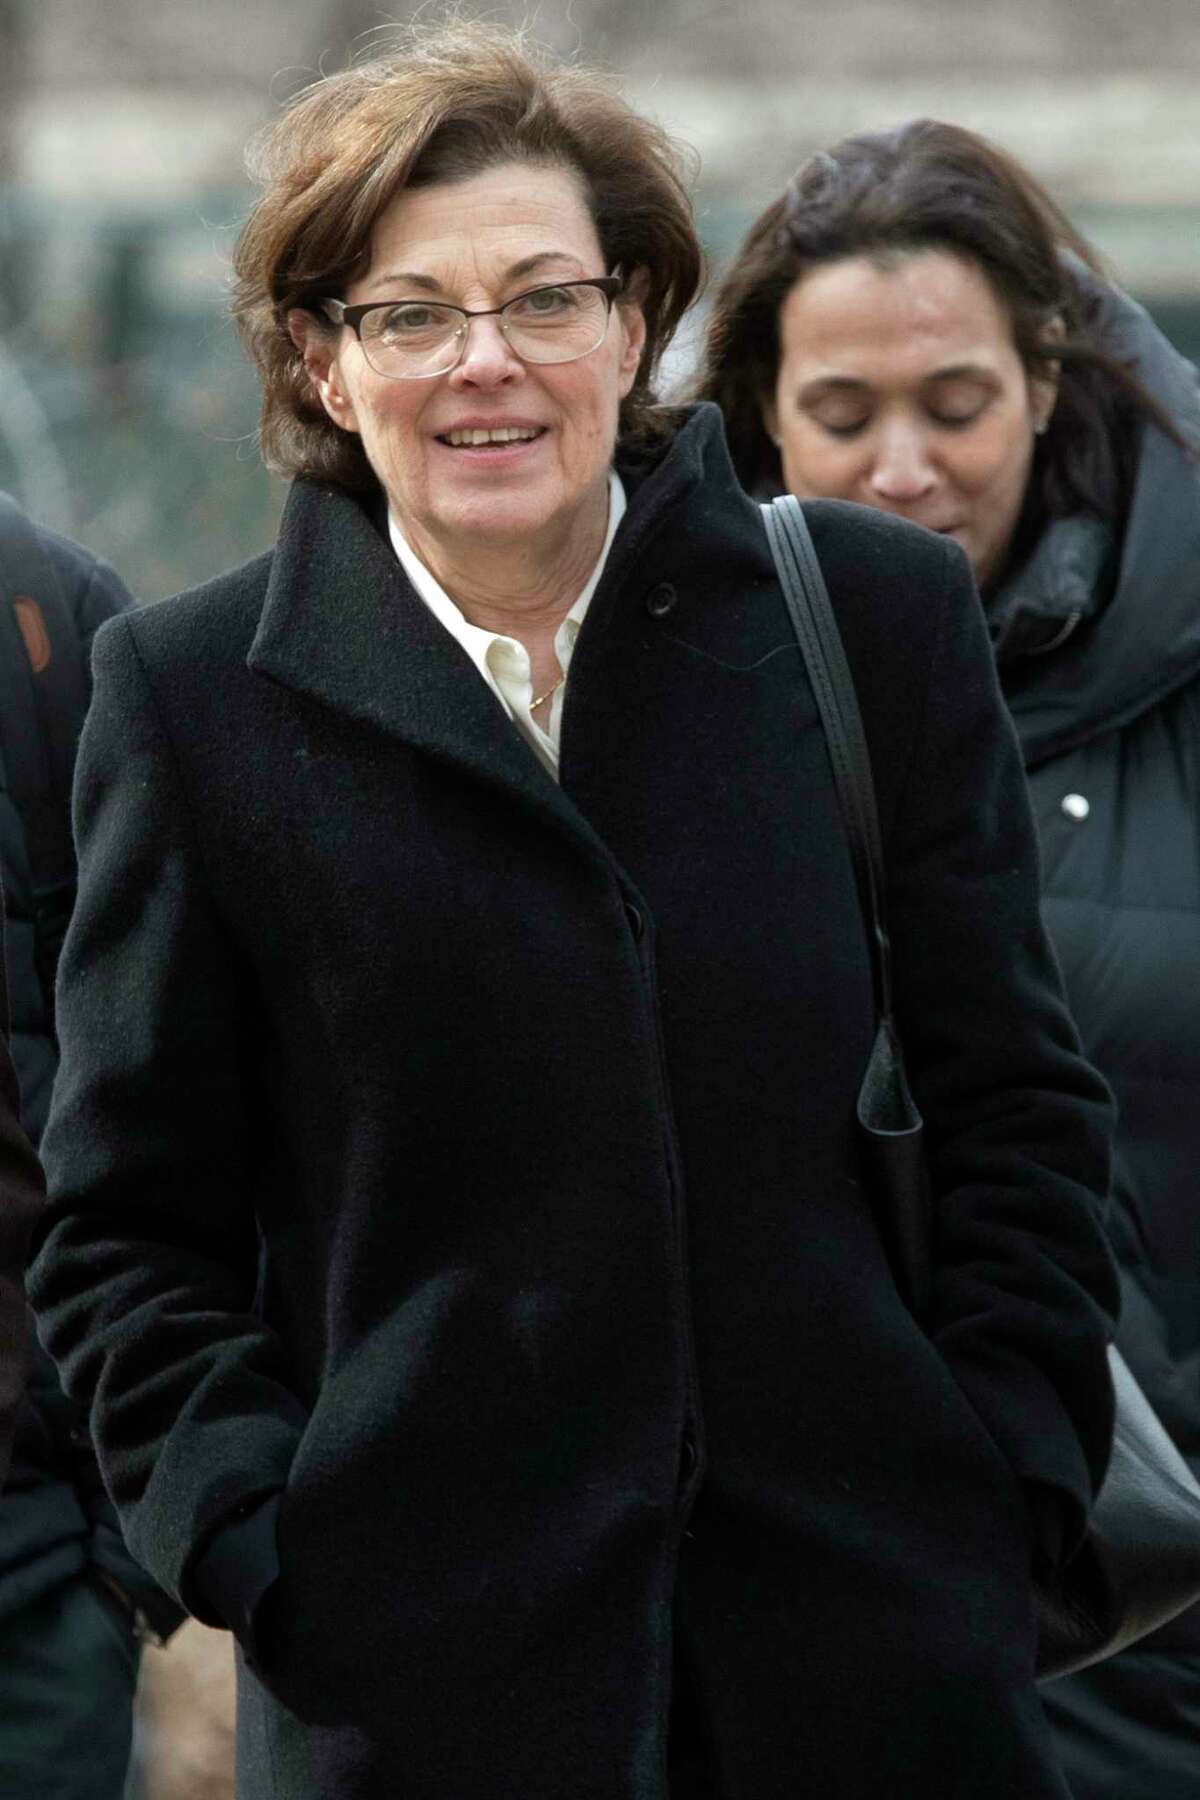 Nancy Salzman arrives at Brooklyn federal court on  Wednesday, March 13, 2019, in New York. Salzman, a co-founder of NXIVM, pleaded guilty to one count of racketeering conspiracy.